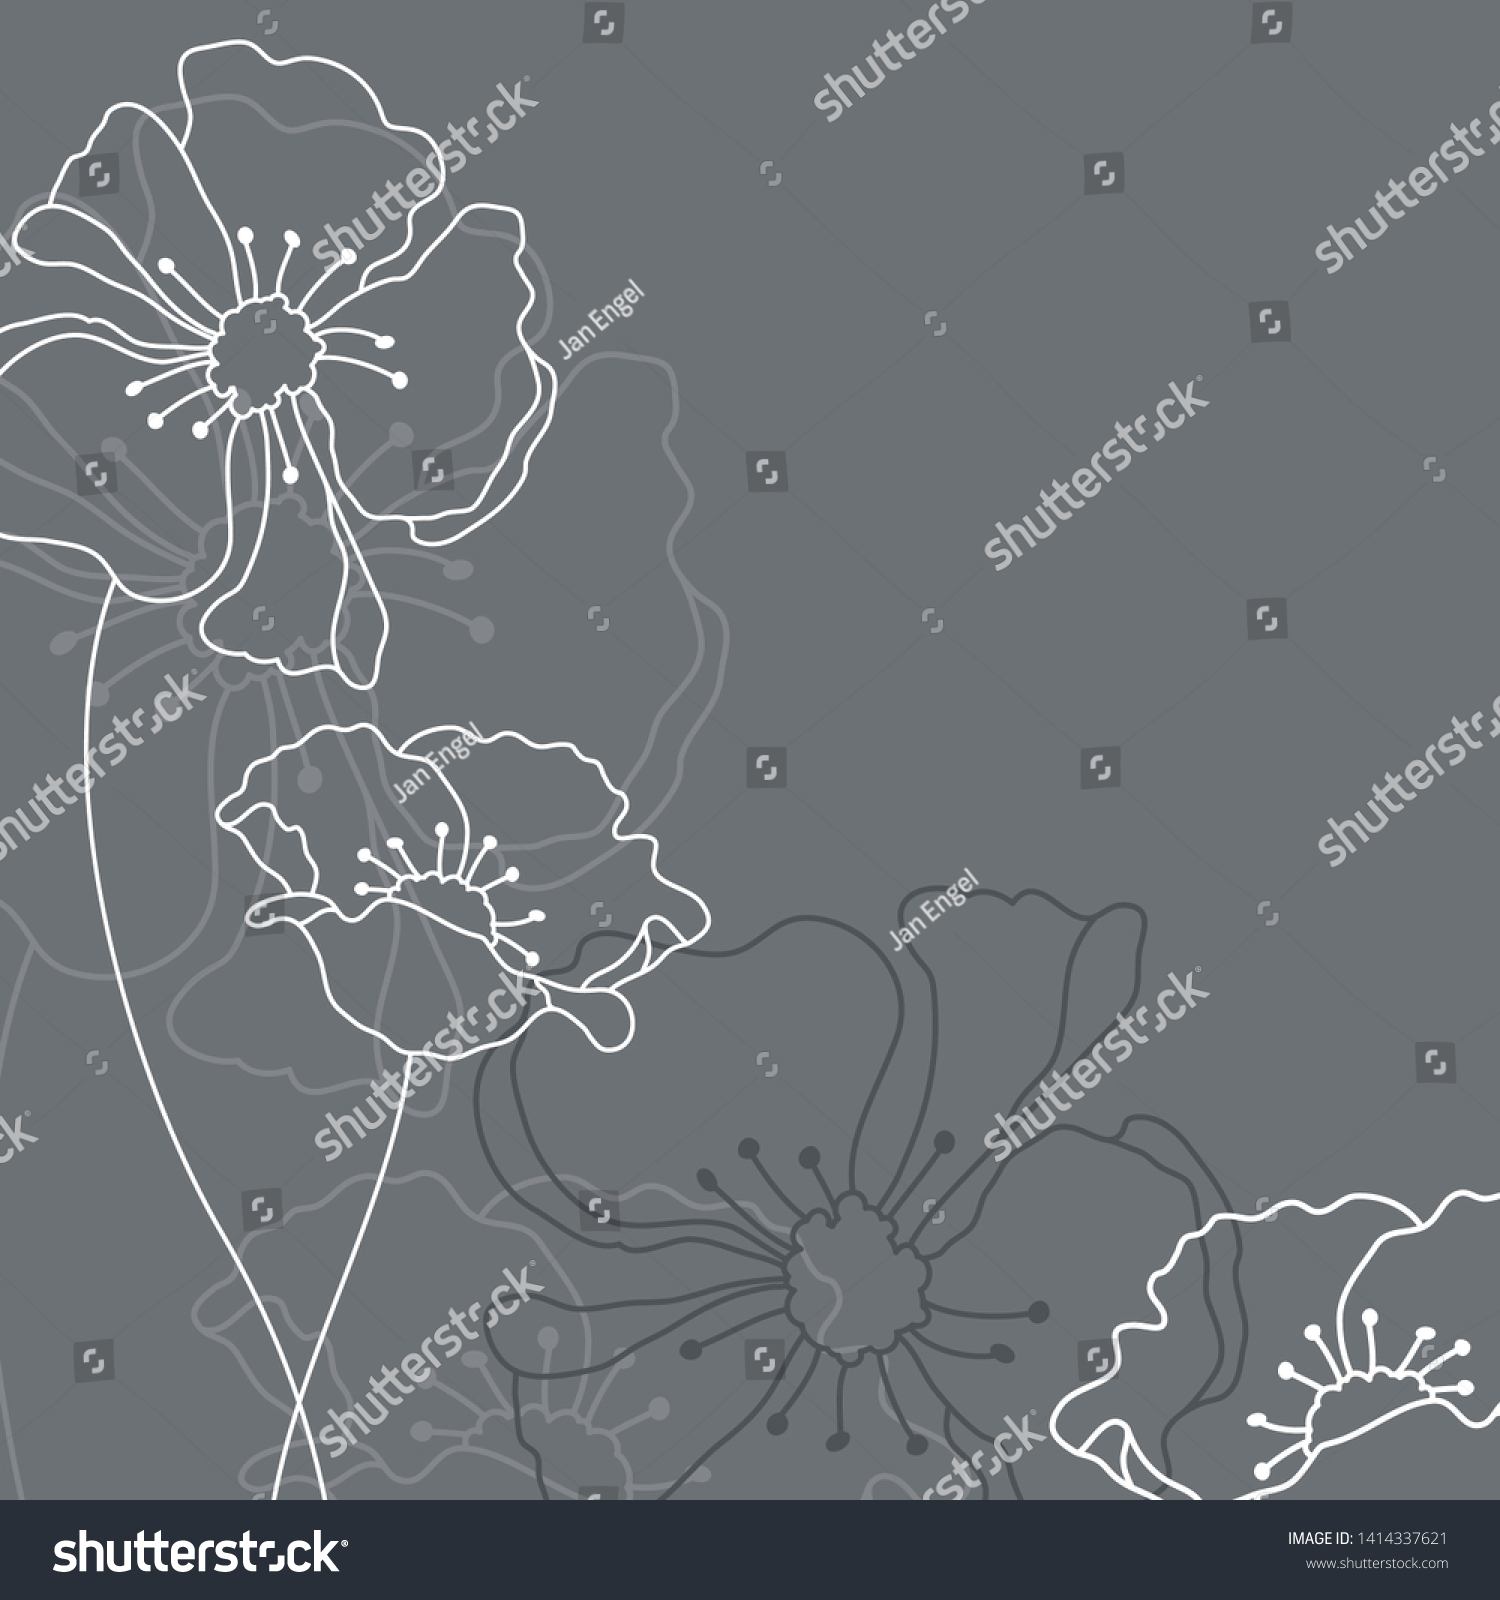 SVG of Square Mourning Card Grey Flowers svg